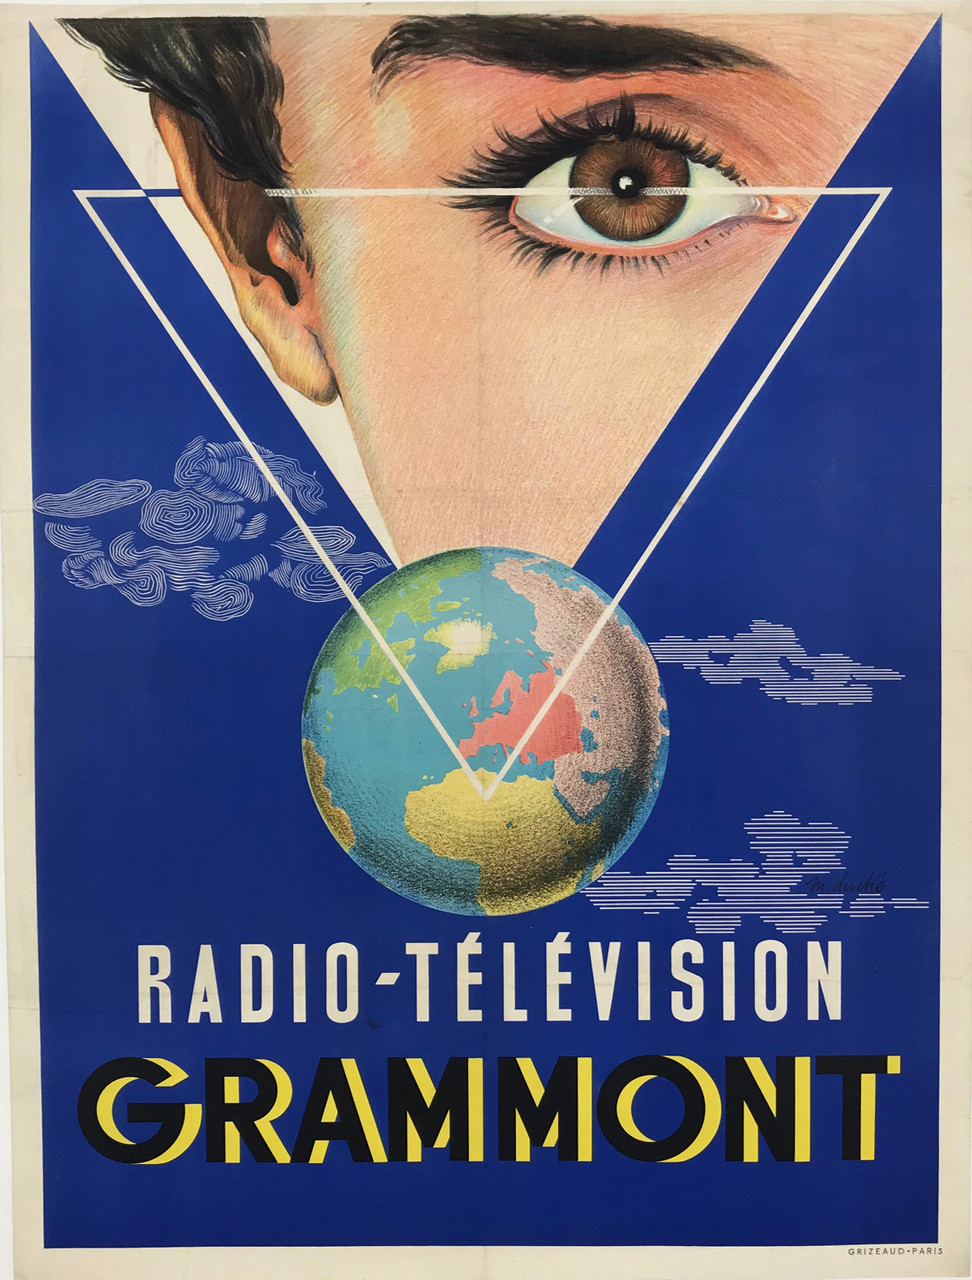 Radio Television Grammont by M. Duche Original 1950 Vintage French Electronics Advertisement Lithograph Poster Linen Backed.